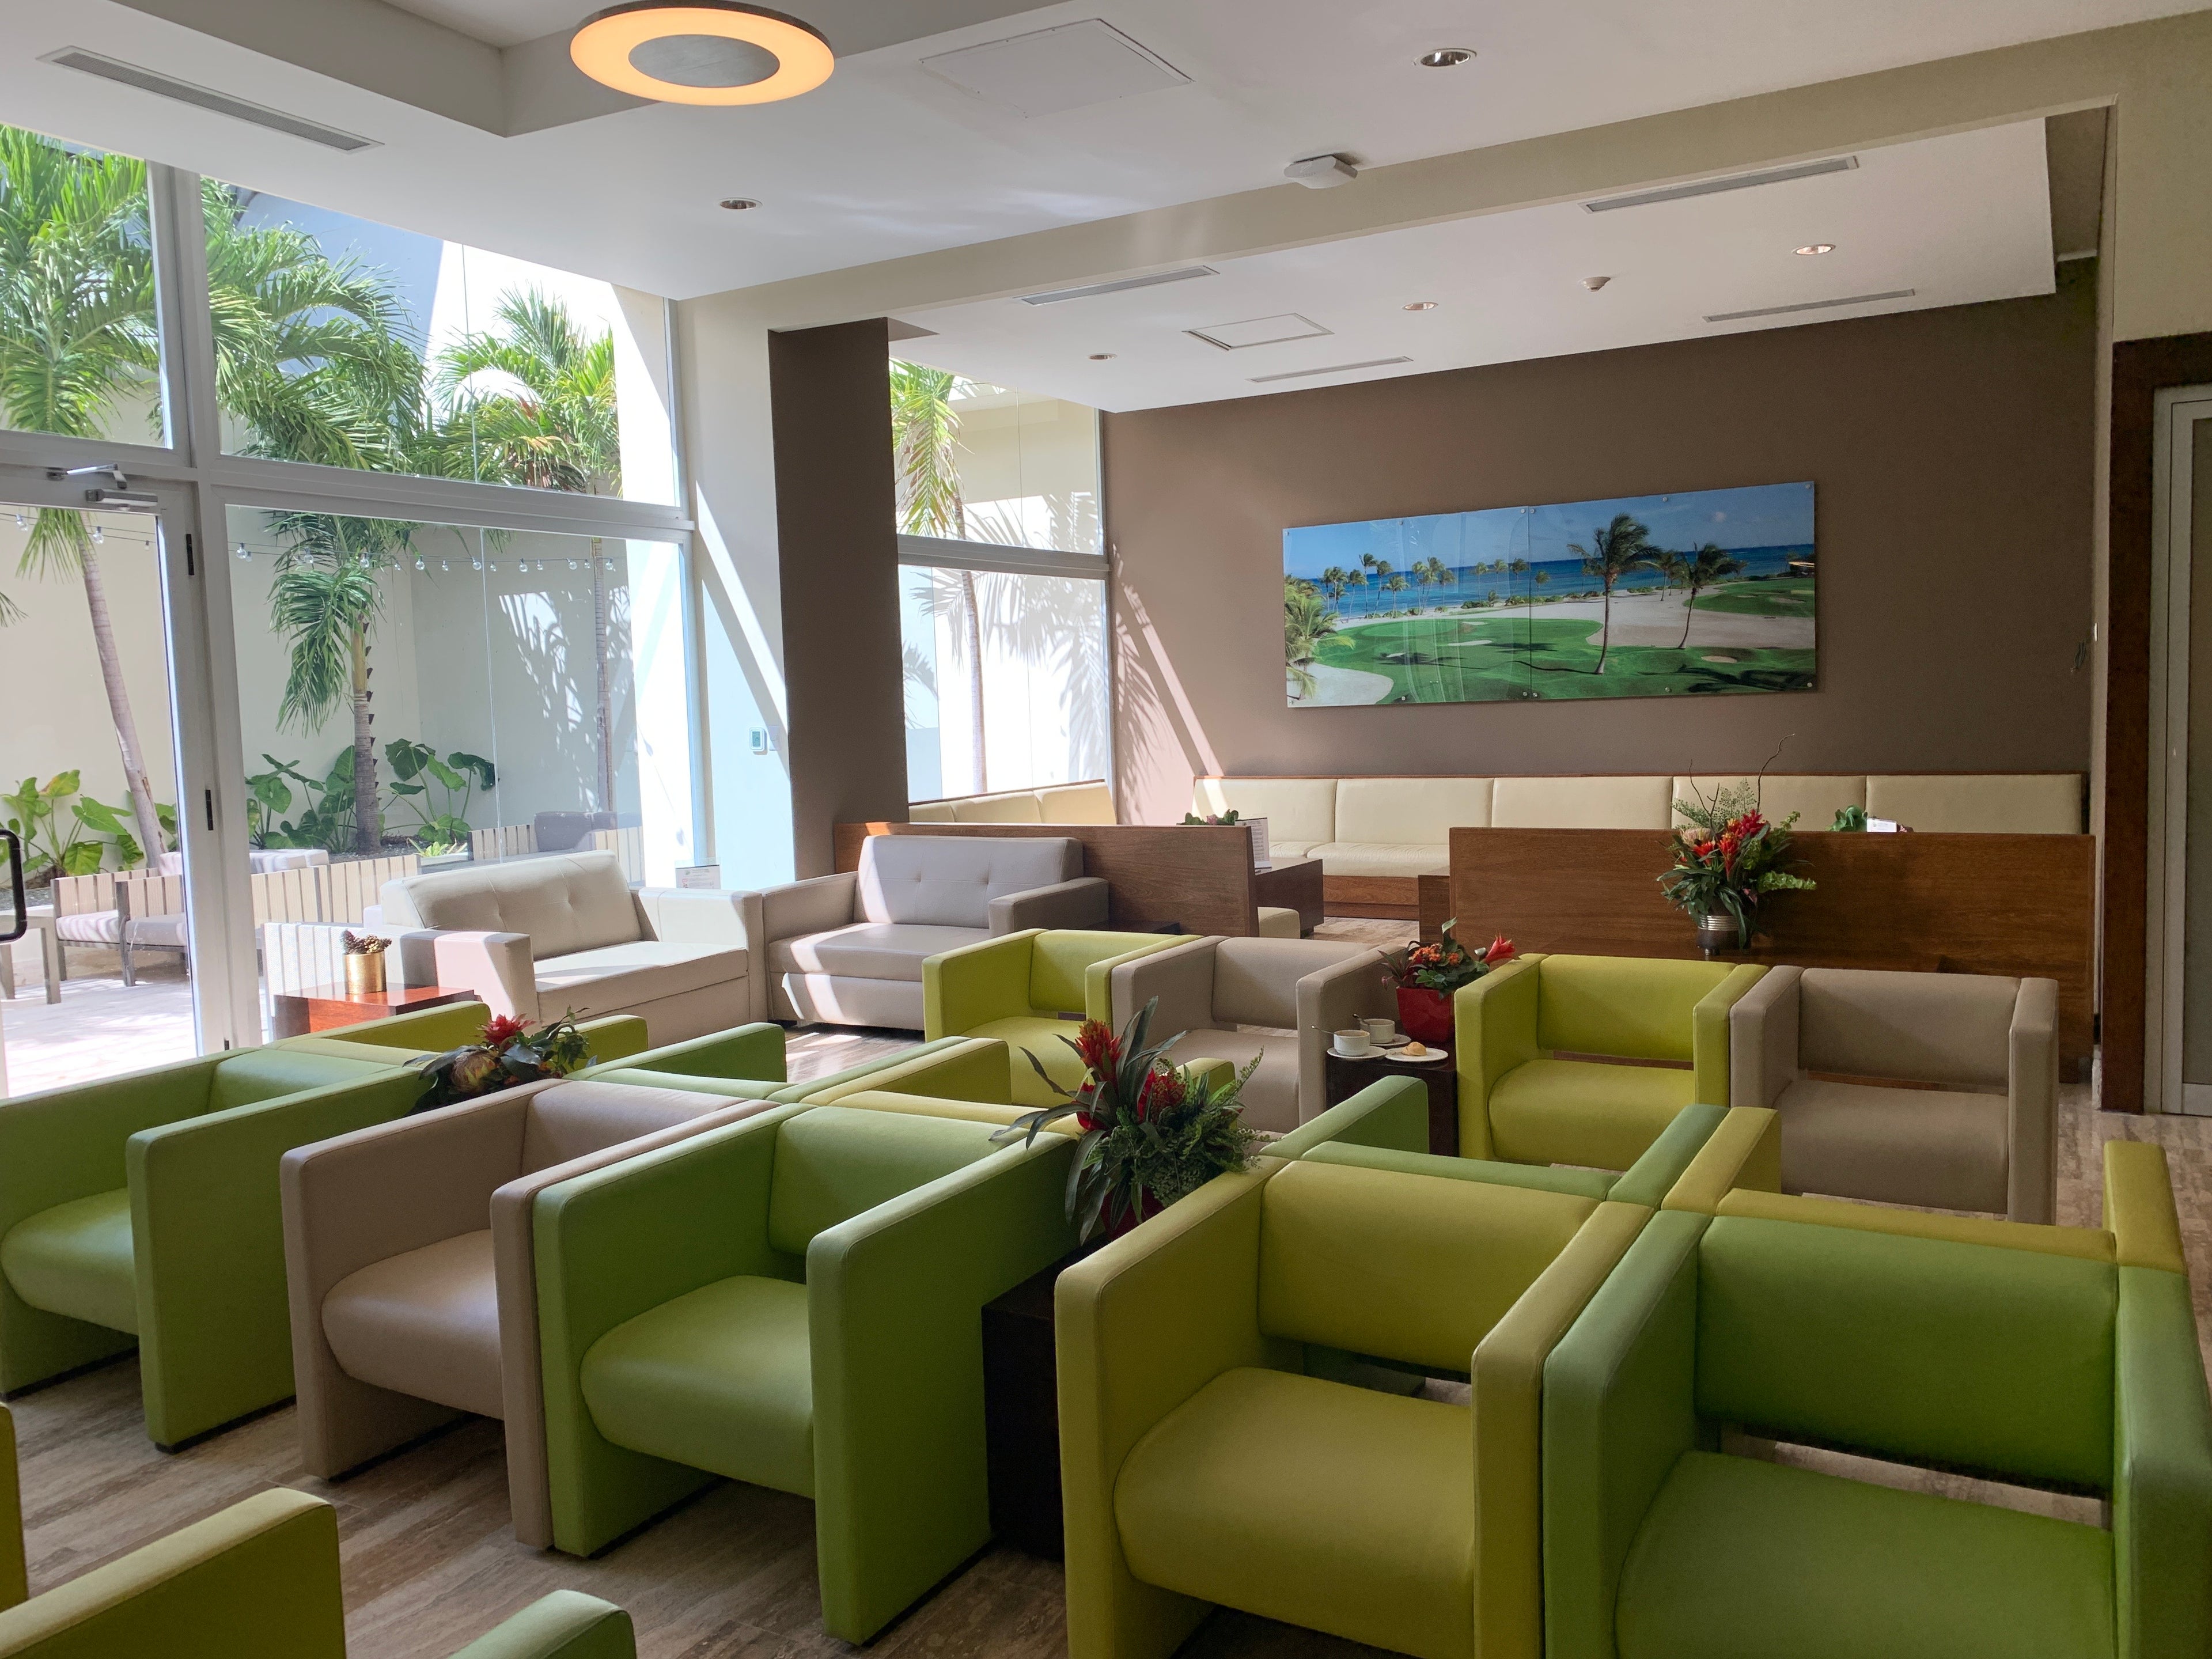 pay per visit airport lounges